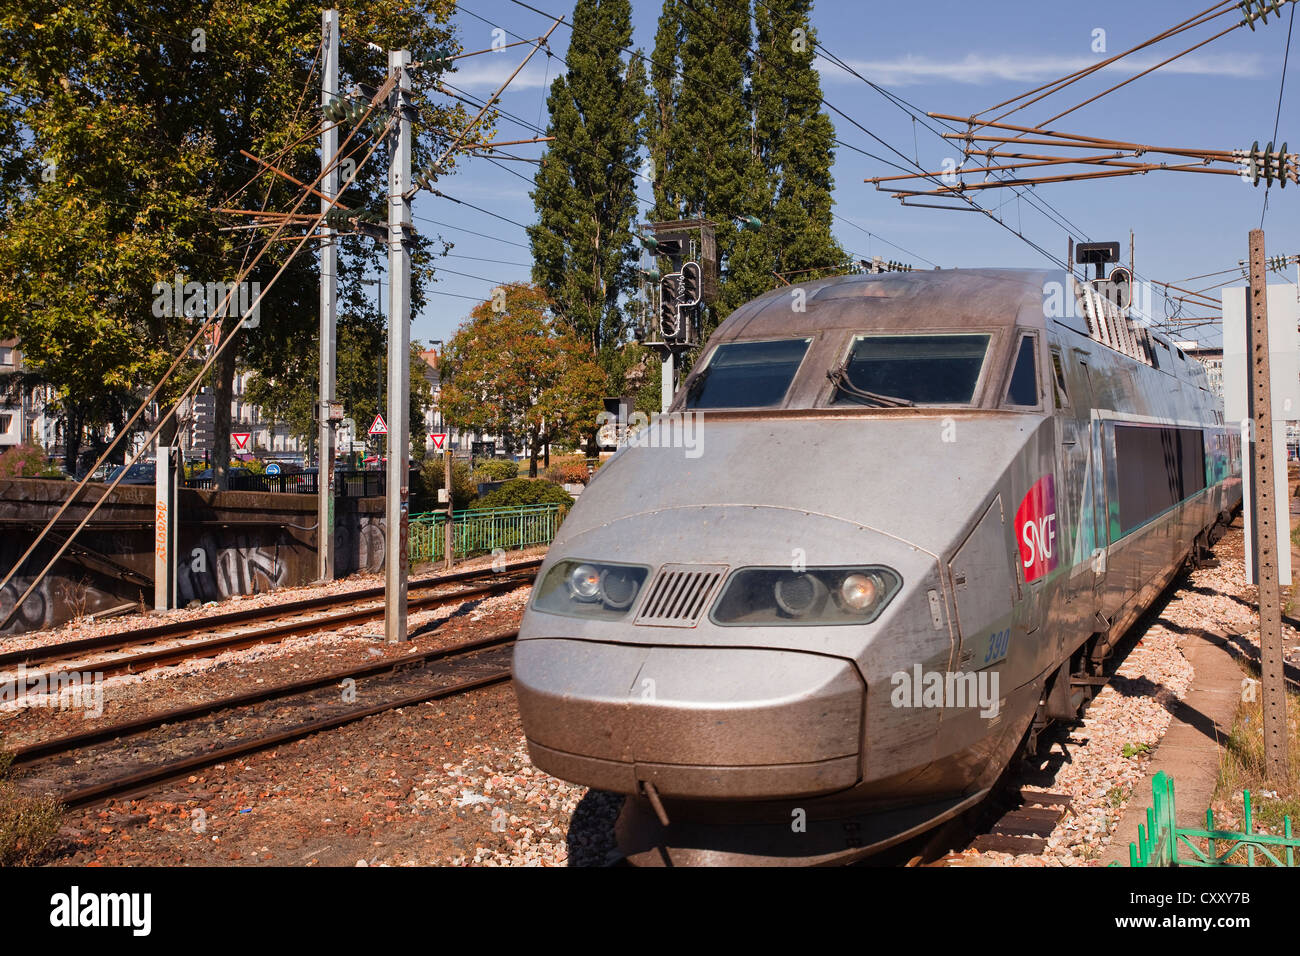 A TGV train leaves Nantes station in France Stock Photo - Alamy